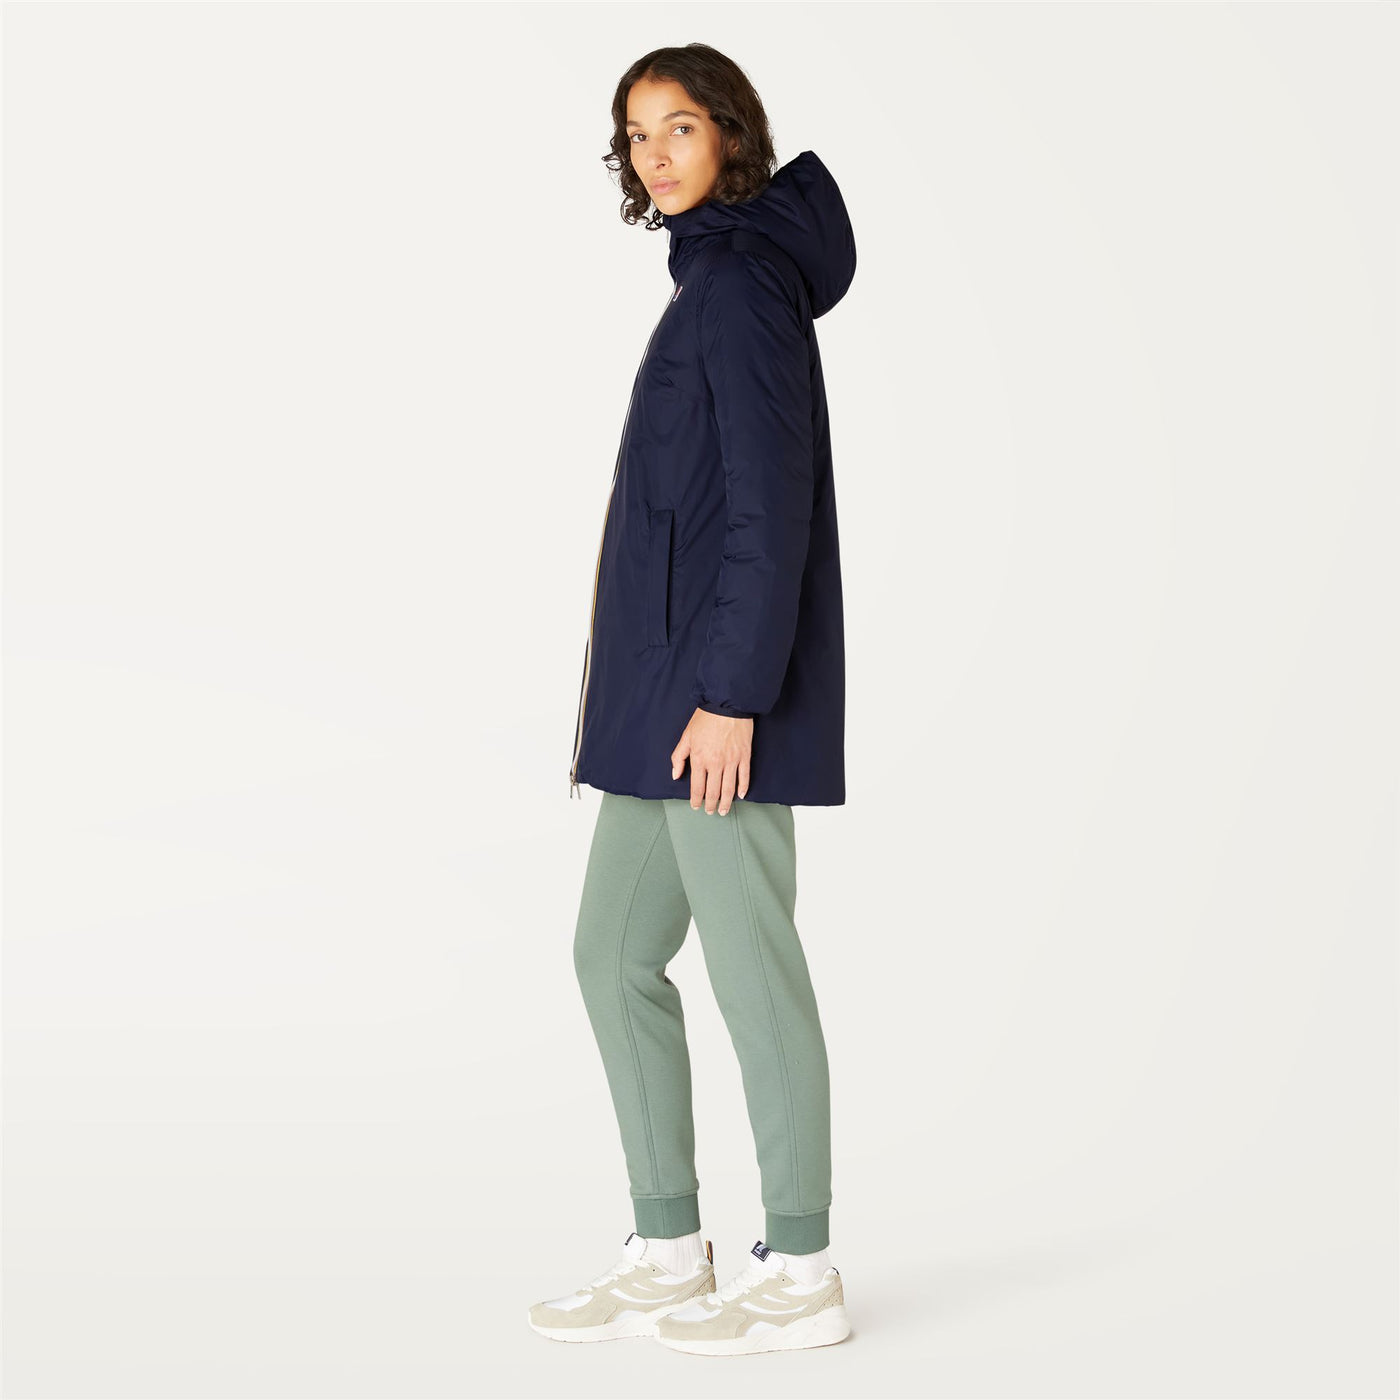 Jackets Woman SOPHIE THERMO PLUS.2 DOUBLE Mid BLUE DEPTH - GREEN LAUREL Detail (jpg Rgb)			